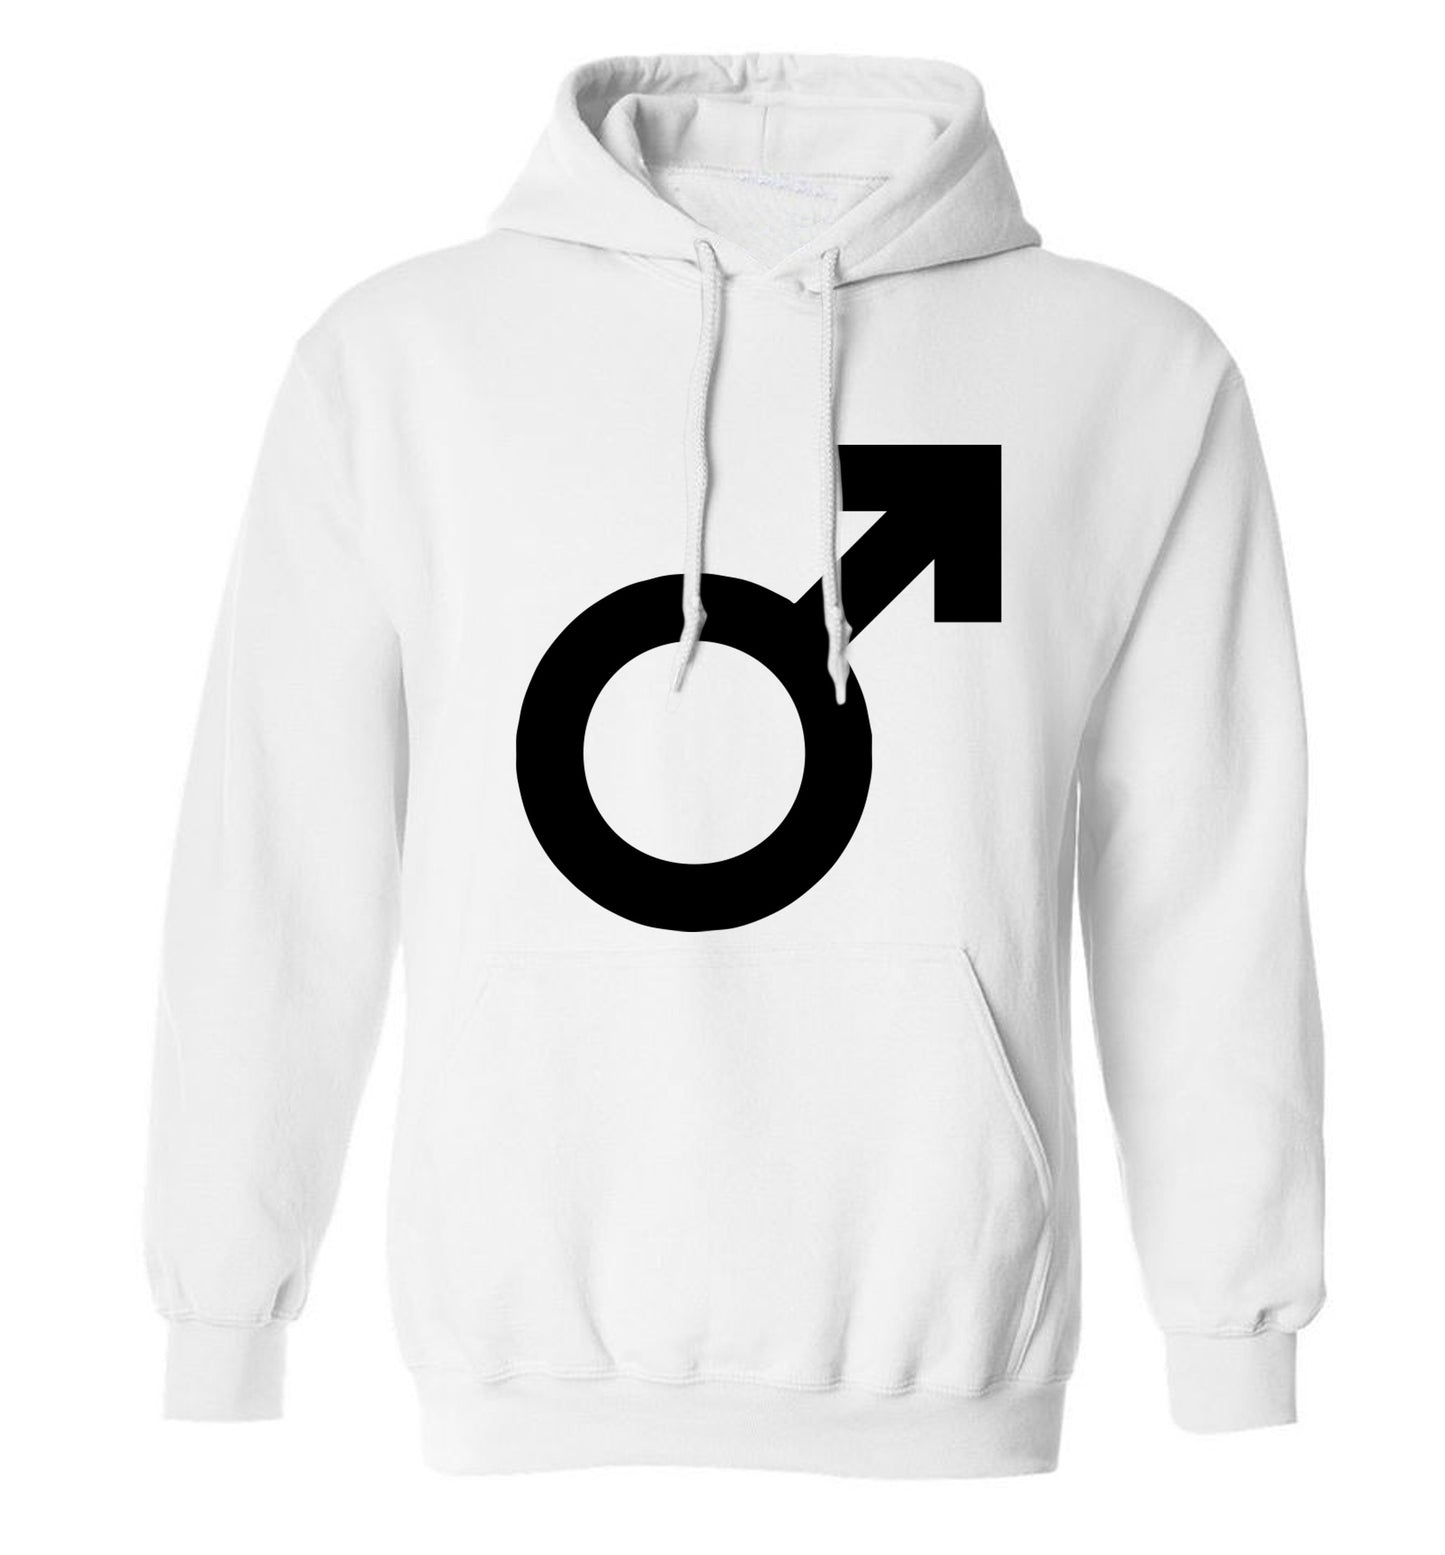 Male symbol large adults unisex white hoodie 2XL